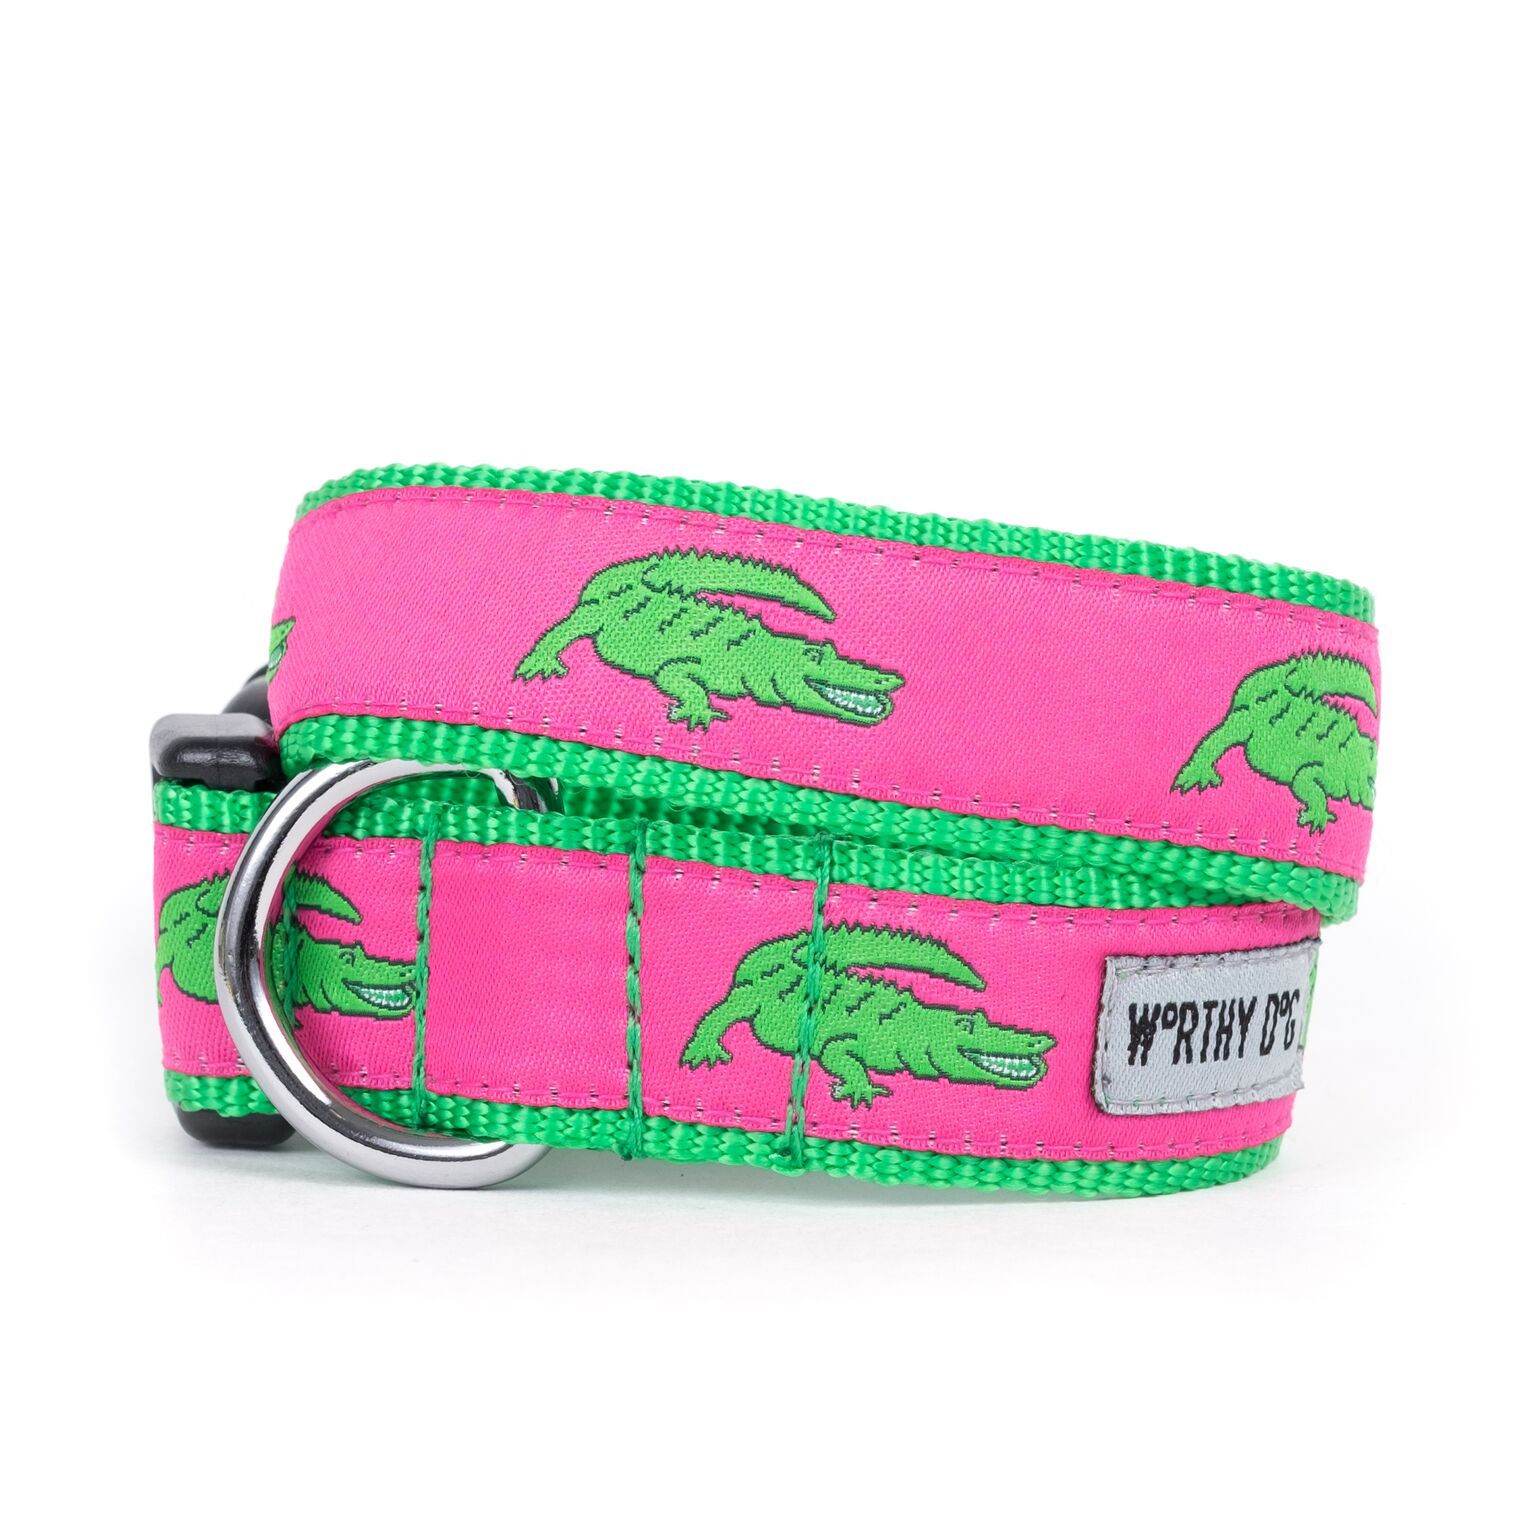 Dog Collar Adjustable - Pattern - Pink Alligators - Durable Safe East to use Strong No-Choke Safe - Fun | Three Boys of Scottsdale Boutique